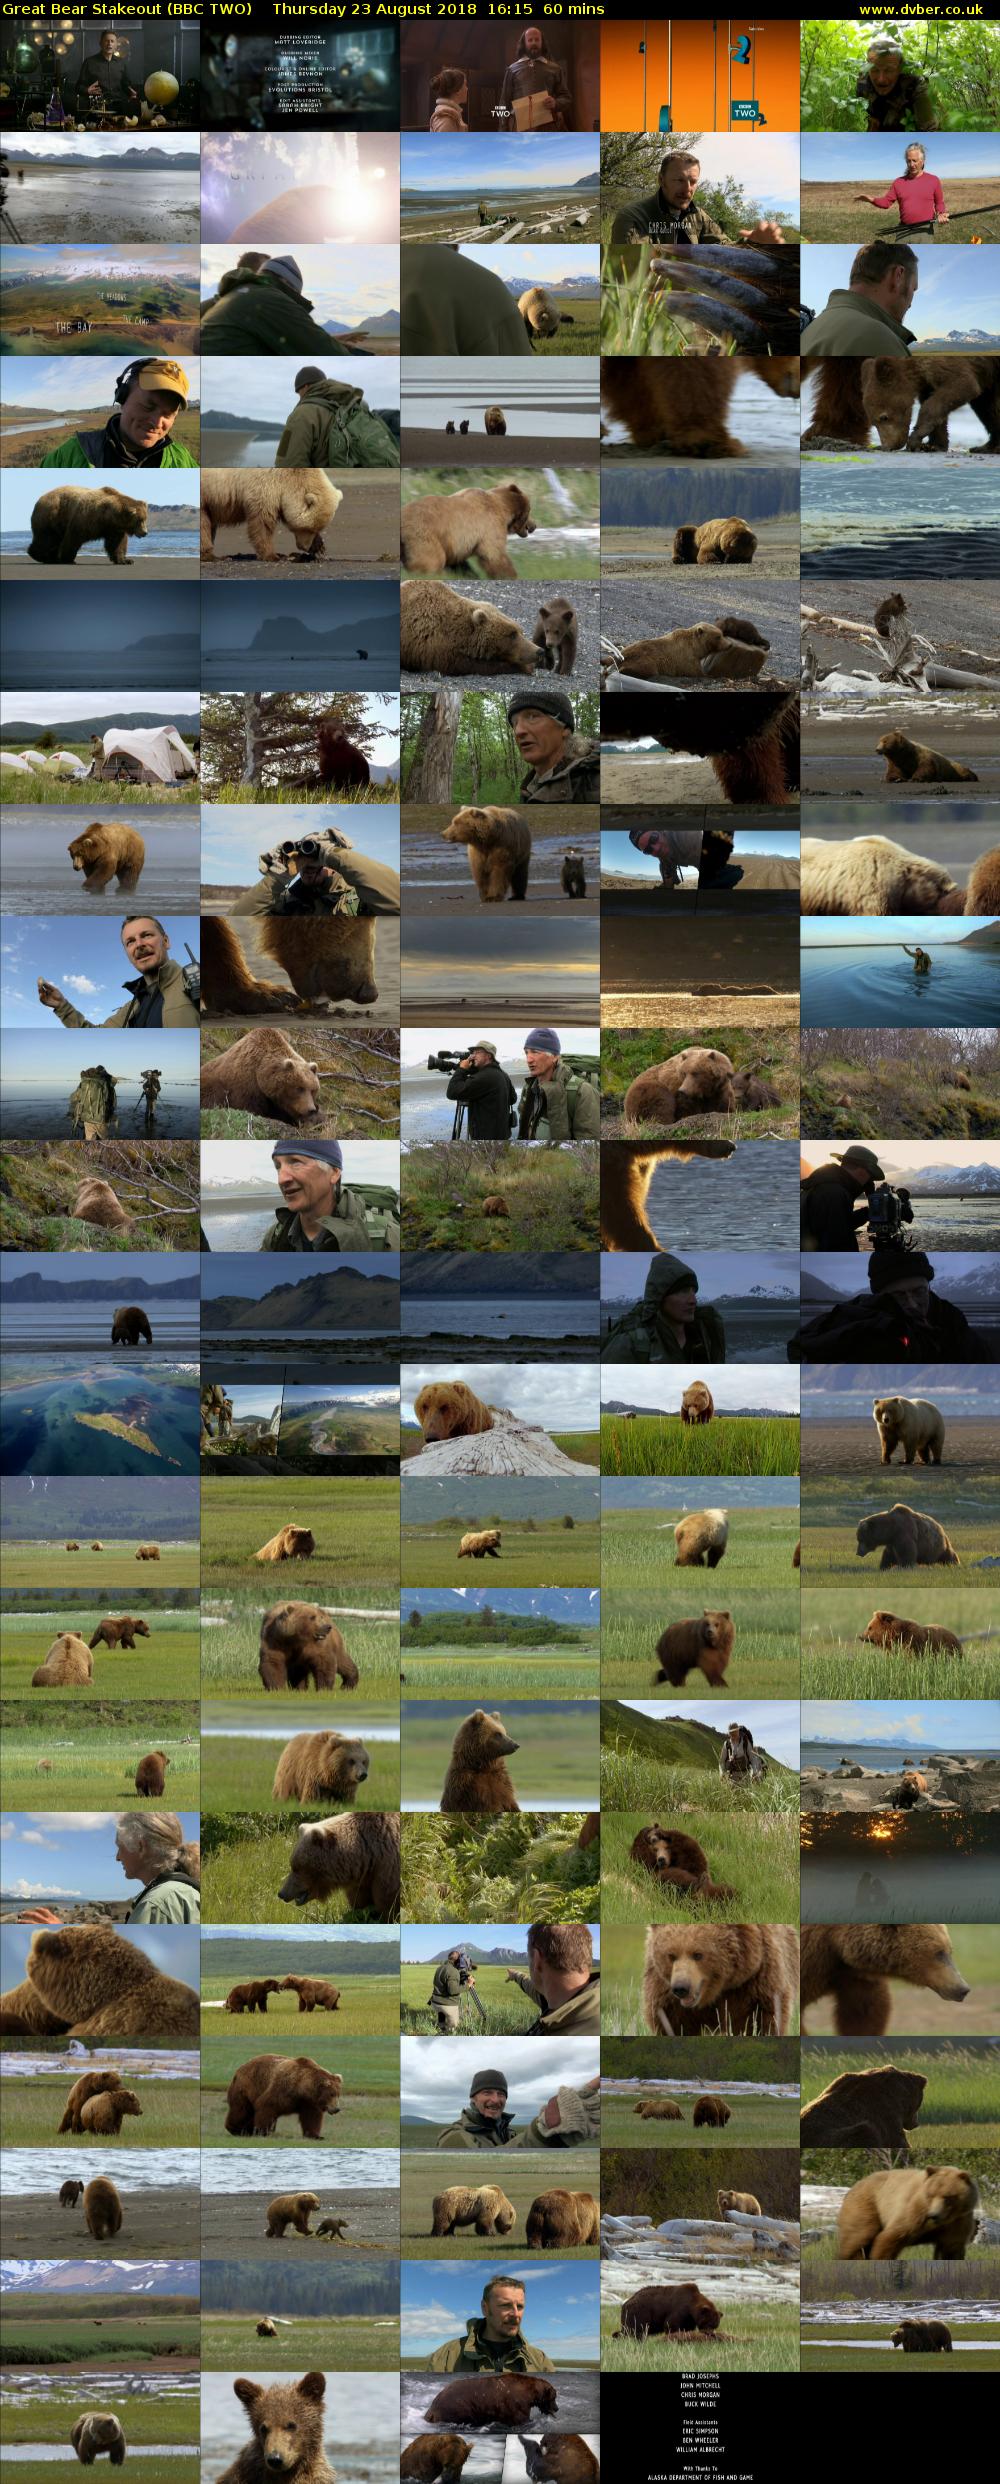 Great Bear Stakeout (BBC TWO) Thursday 23 August 2018 16:15 - 17:15